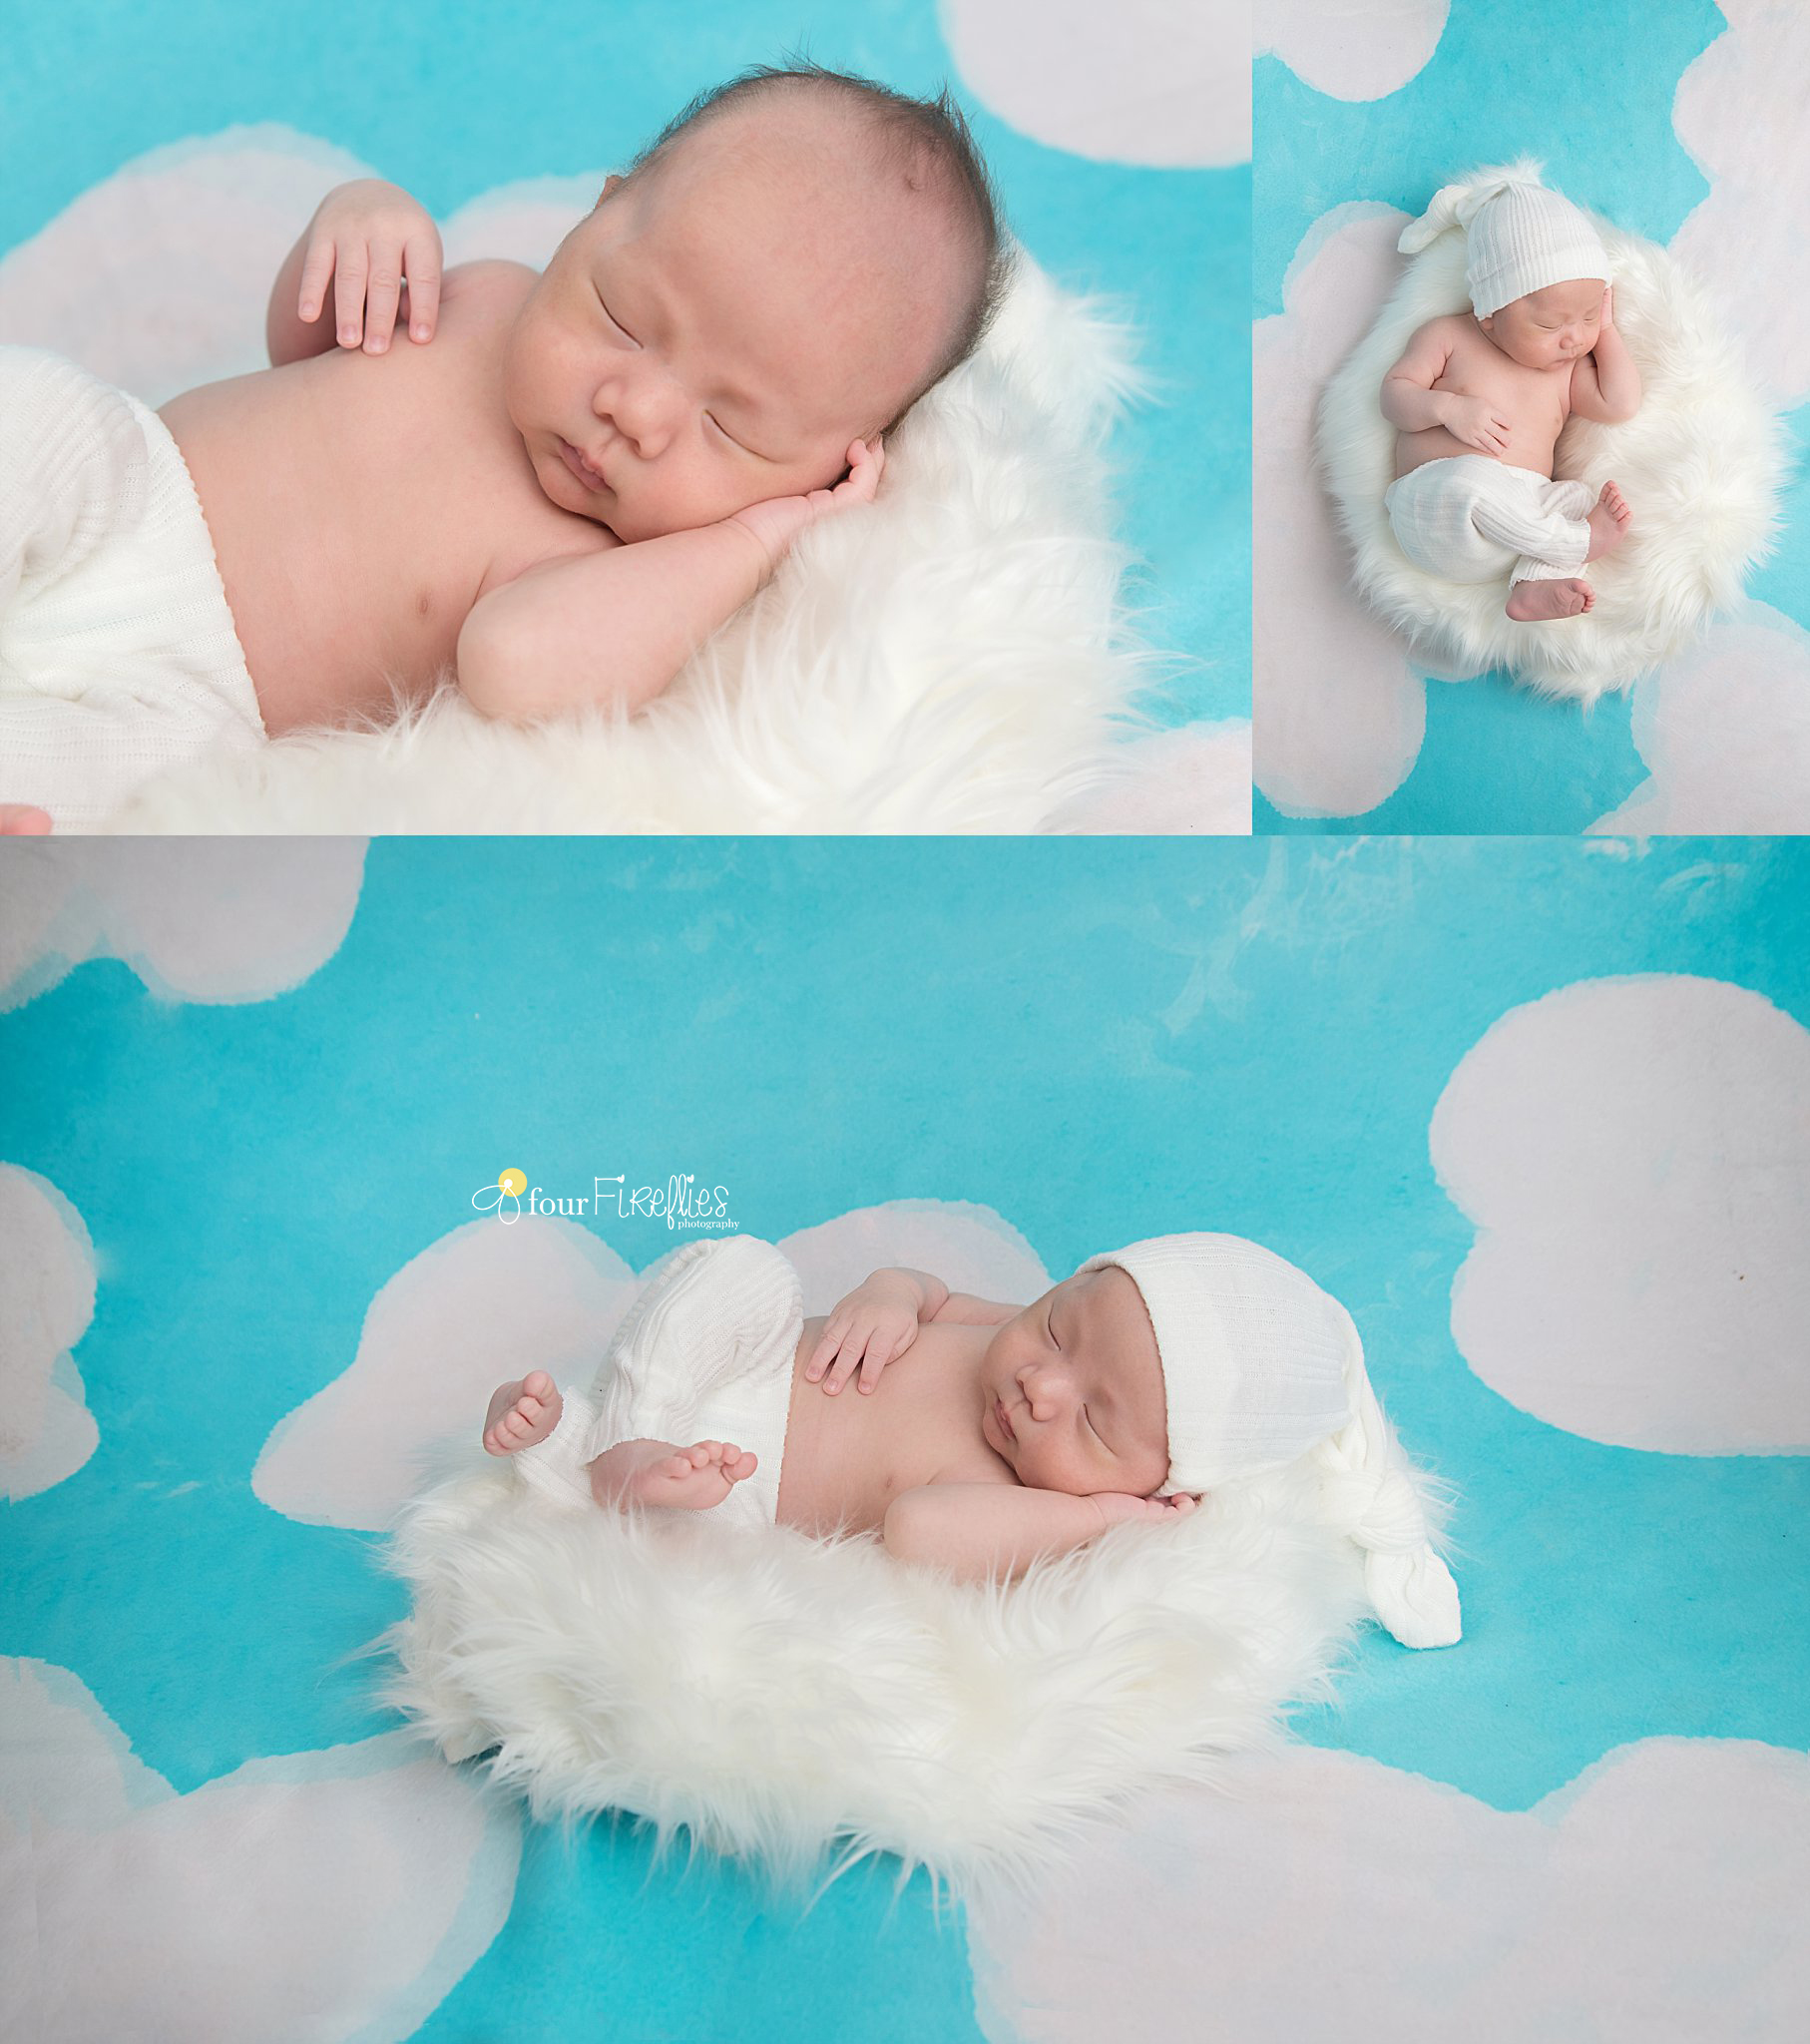 st-louis-newborn-photographer-baby-boy-in-white-pants-and-hat-laying-on-clouds.jpg